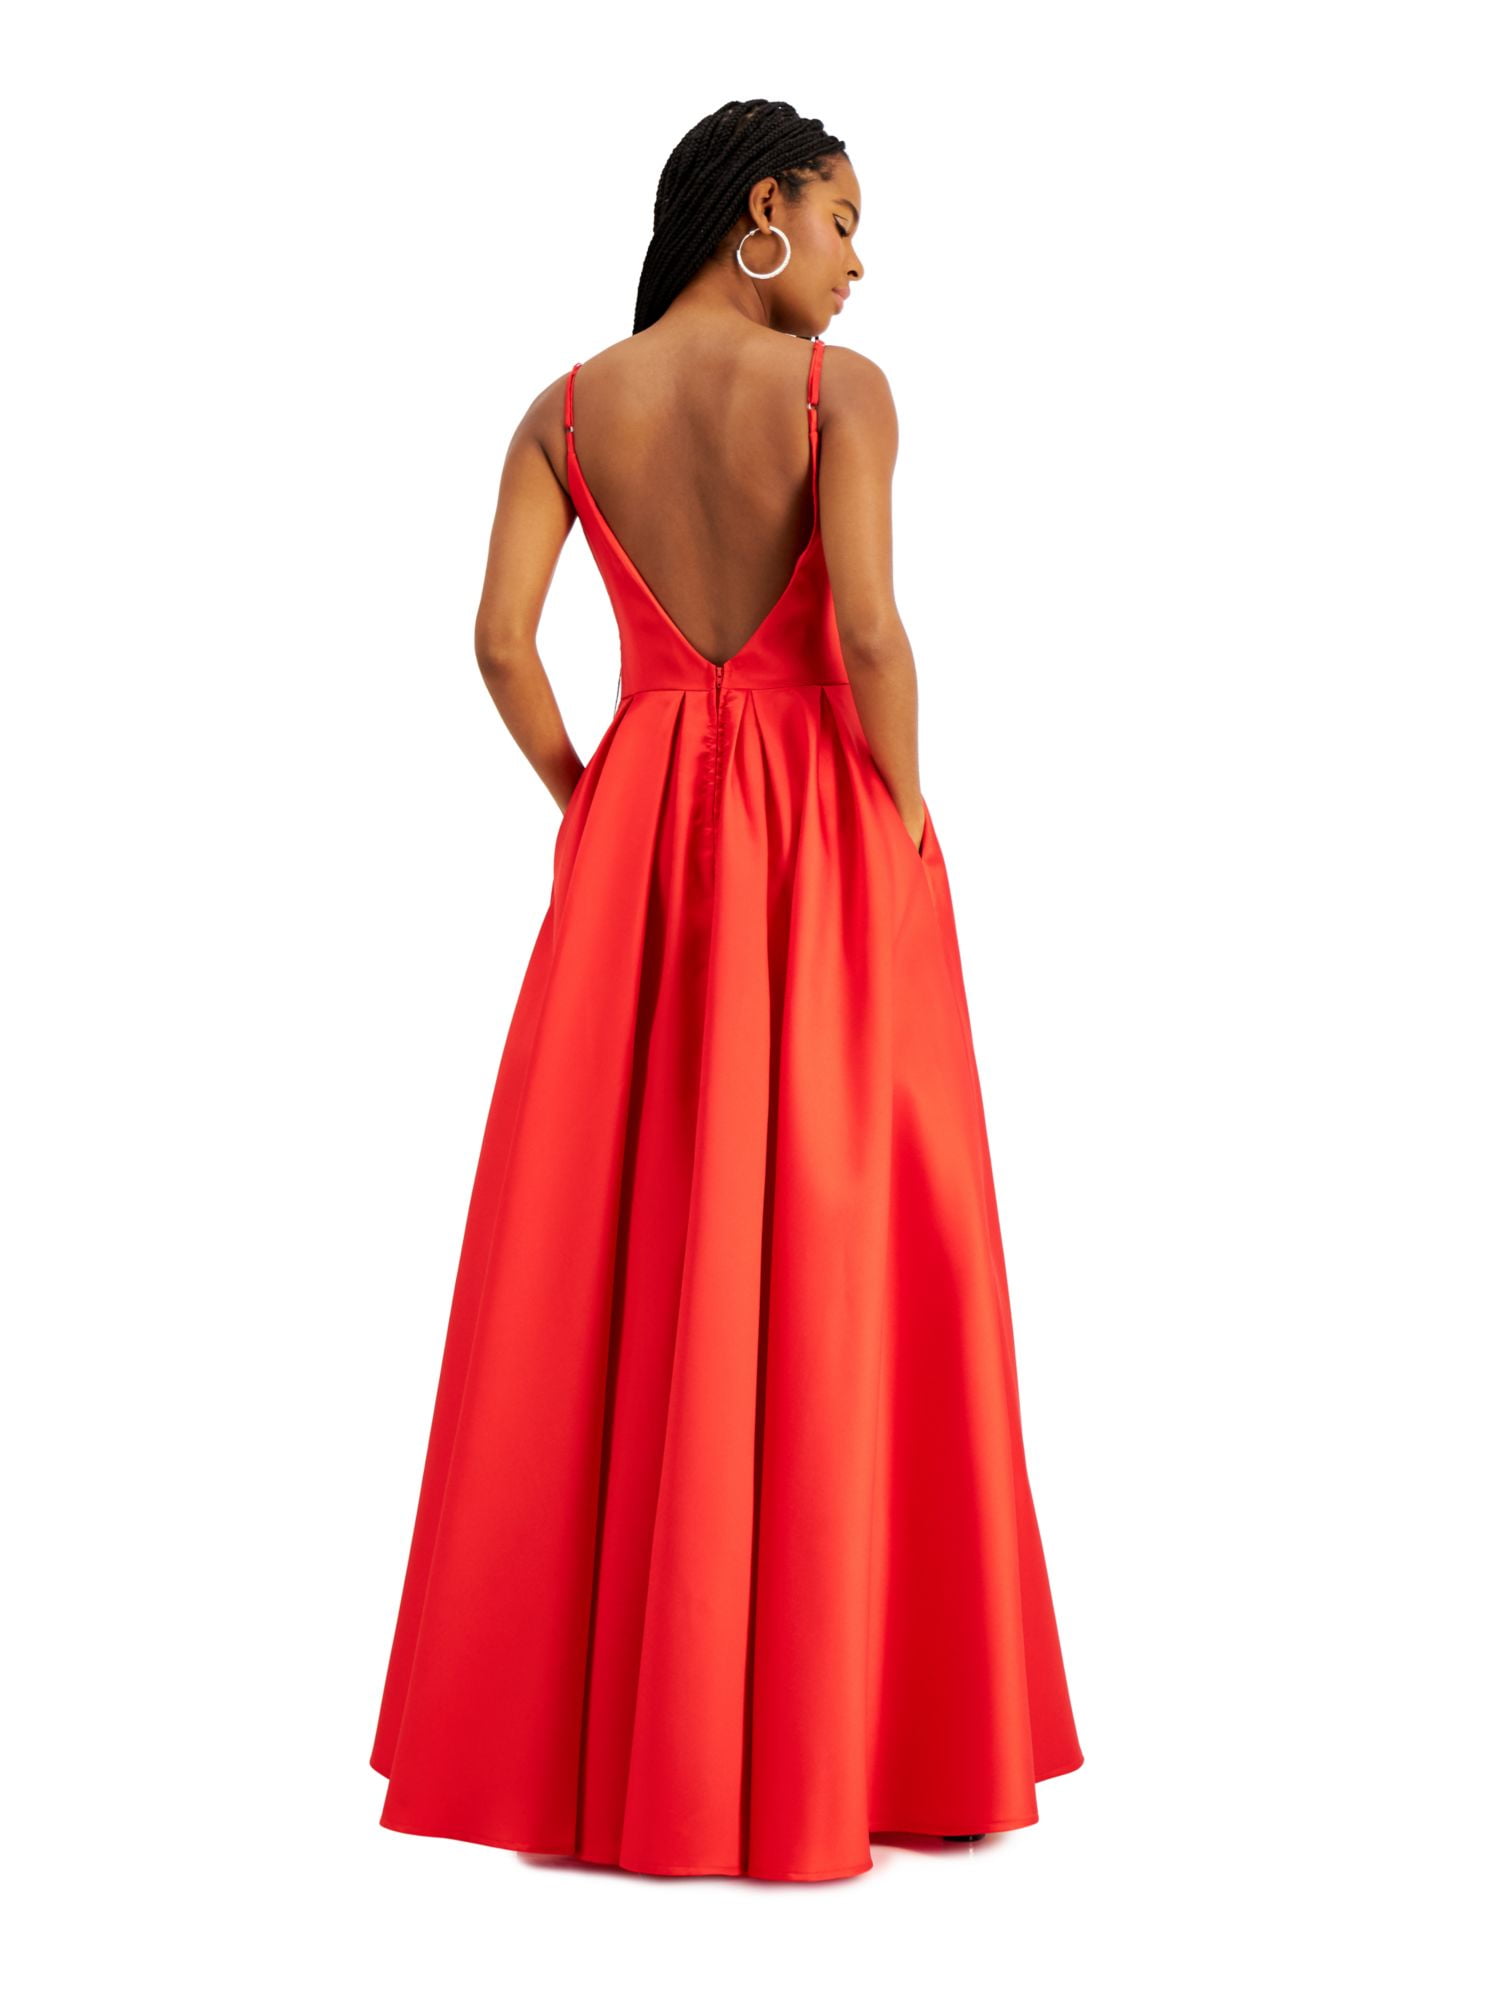 SAY YES TO THE PROM Womens Red Embellished Spaghetti Strap V Neck  Full-Length Prom Fit + Flare Dress Juniors 15\16